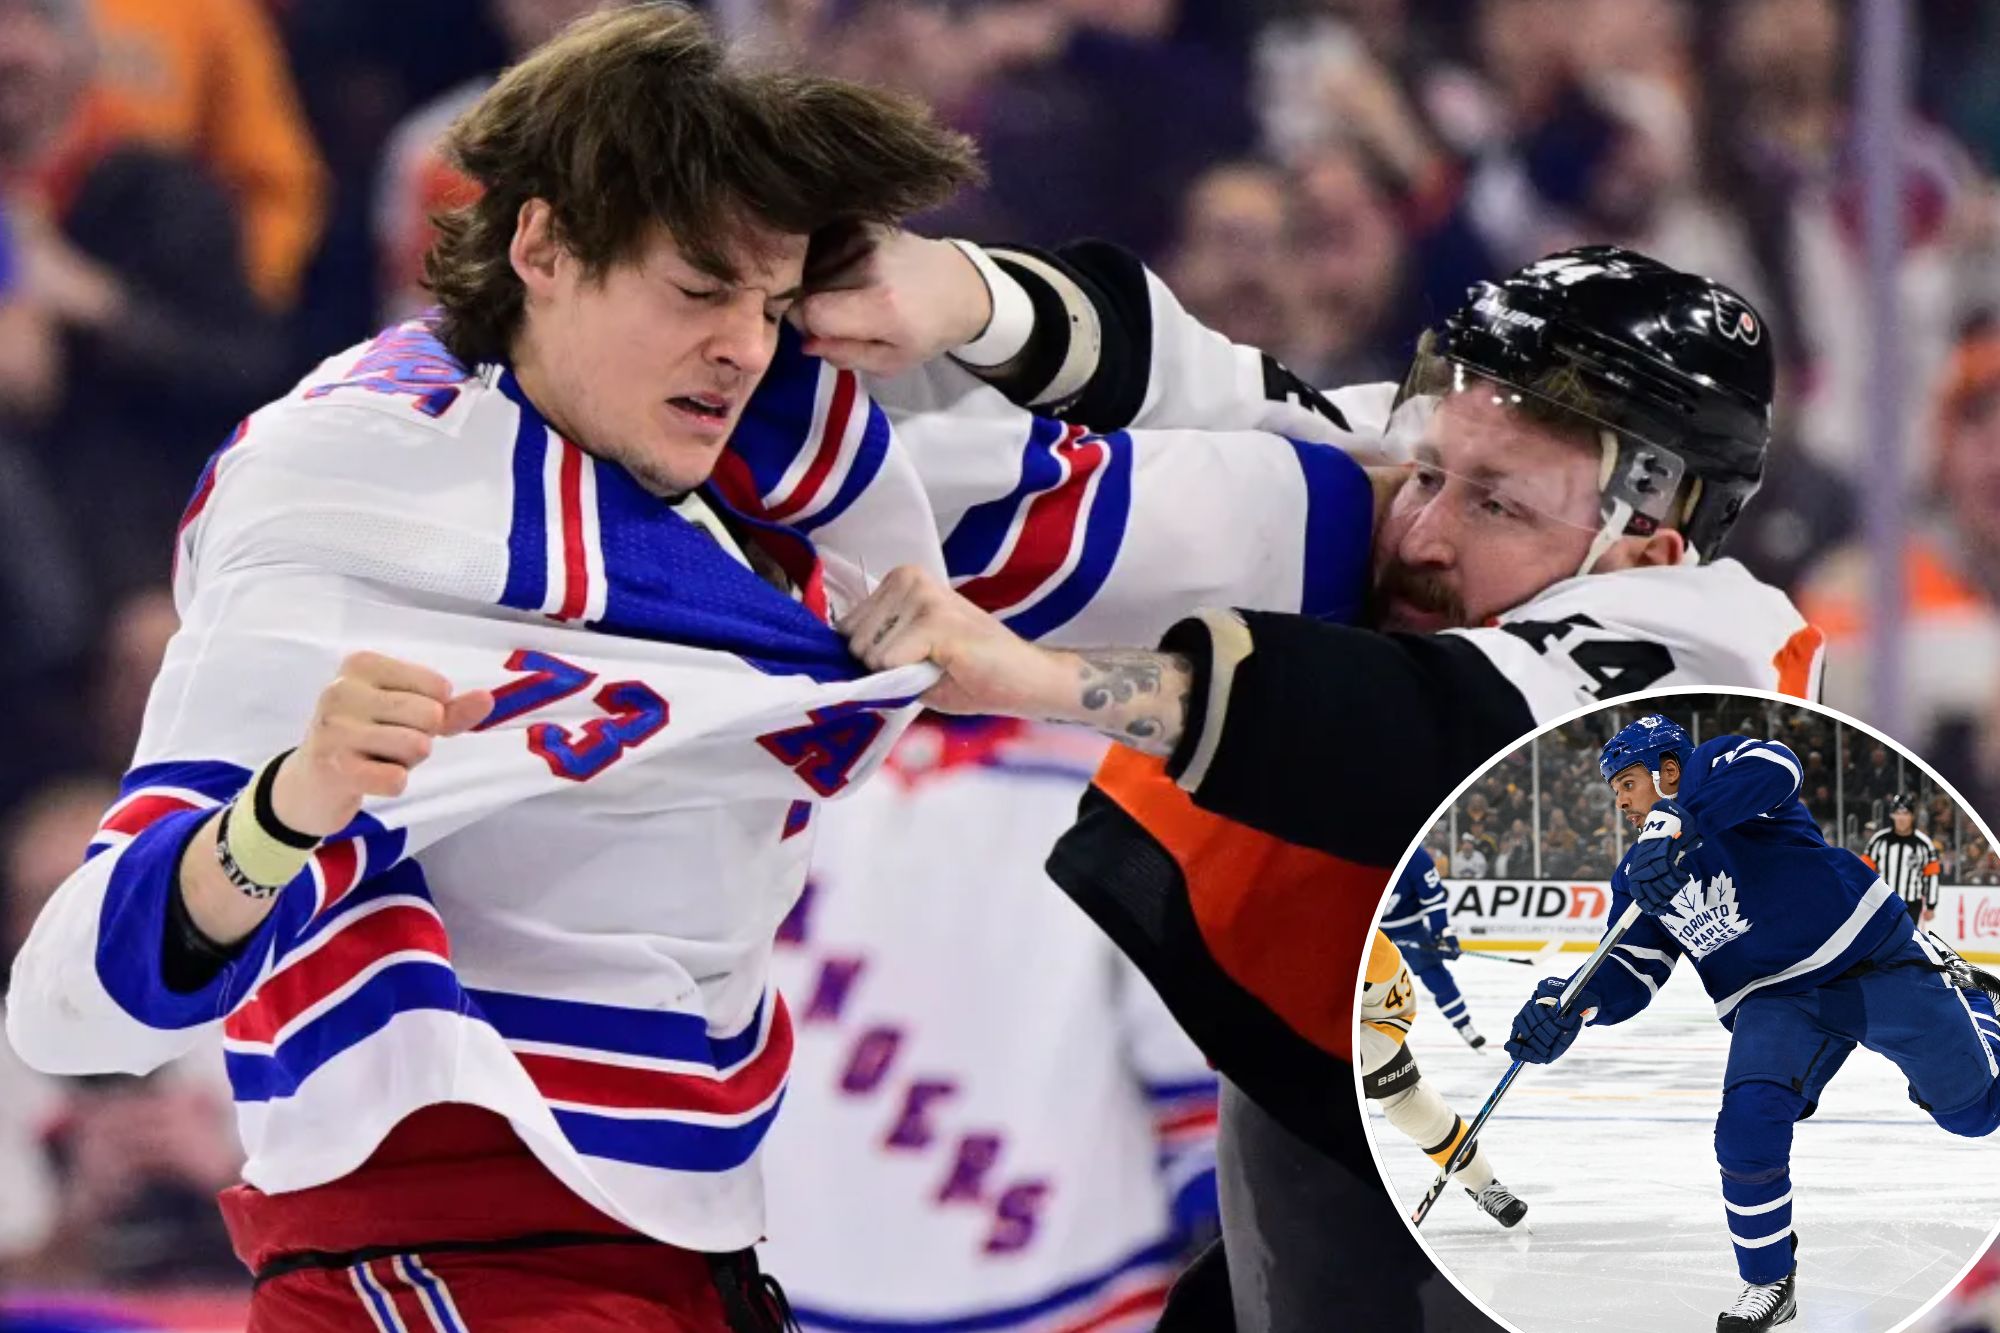 Enforcers Matt Rempe (left), fighting against the Flyers, and Ryan Reaves (inset) could be on a collision course when the Rangers face the Maple Leafs.